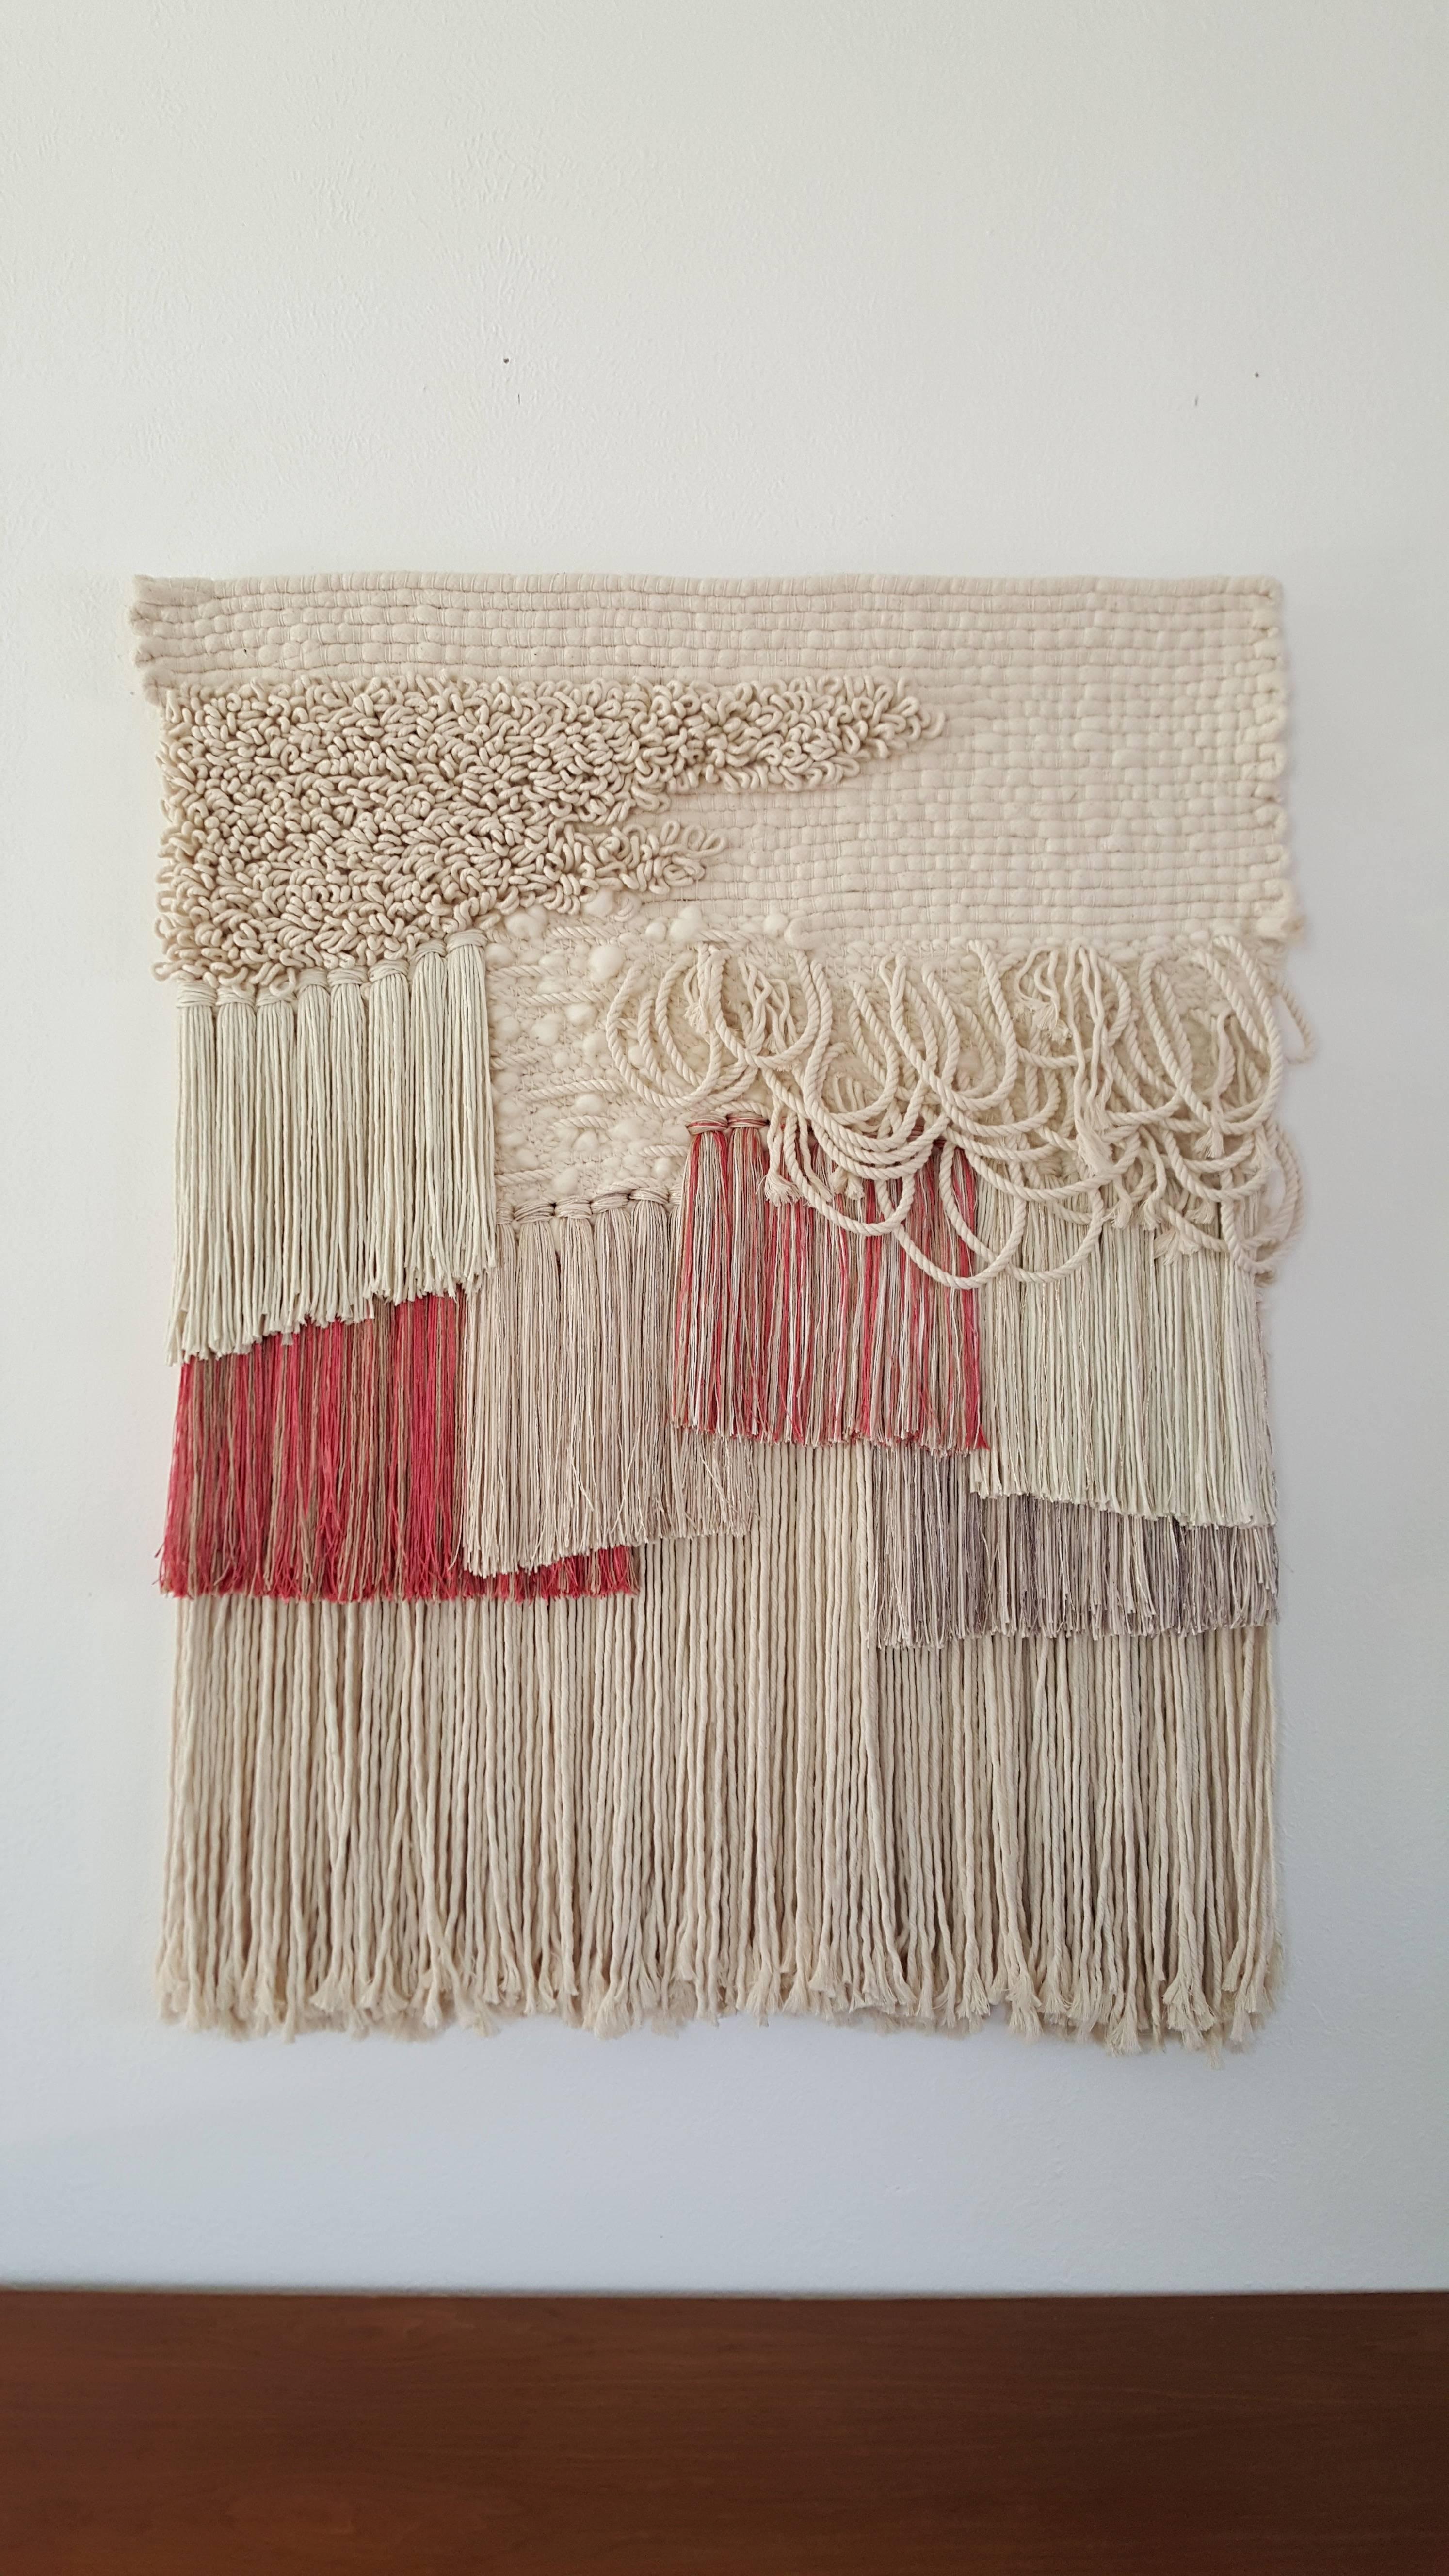 Hand woven, tapestry style, wall hanging by Janelle Pietrzak of All Roads.  Rich use of texture and color like creams and pink creates depth in this piece. Fibers used are cotton and shiny viscose.  Weaving hangs fully supported from a hidden french